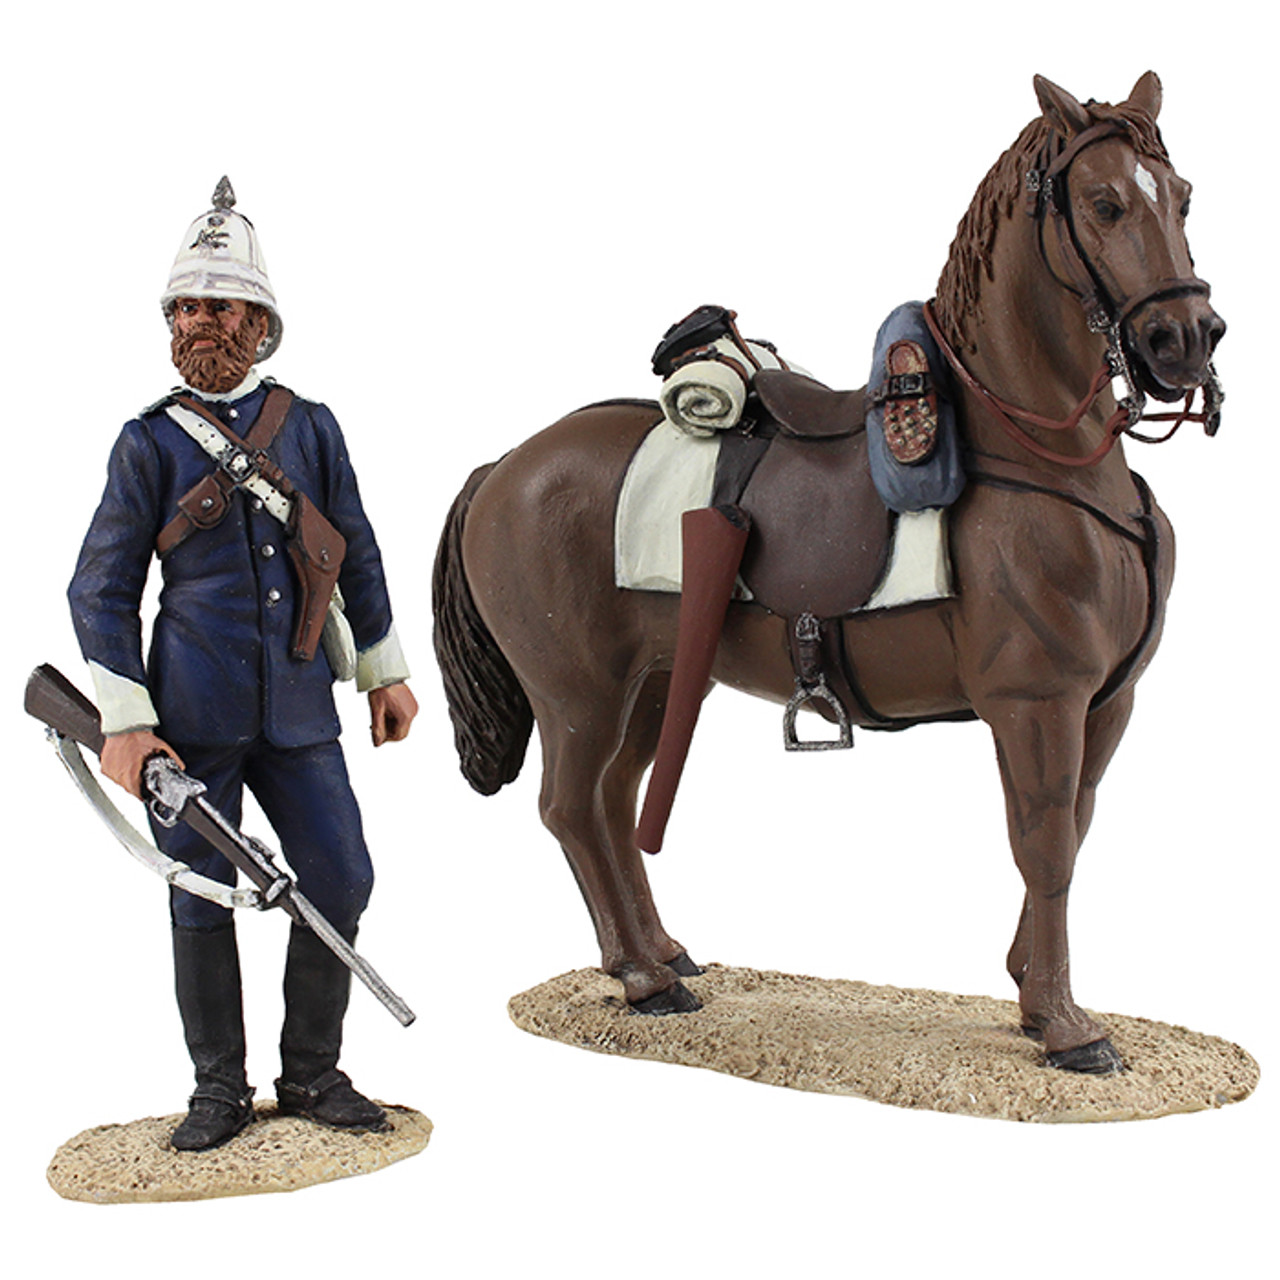 British Natal Carbineers scouting Anglo-Zulu Wars PERRY MINIATURES